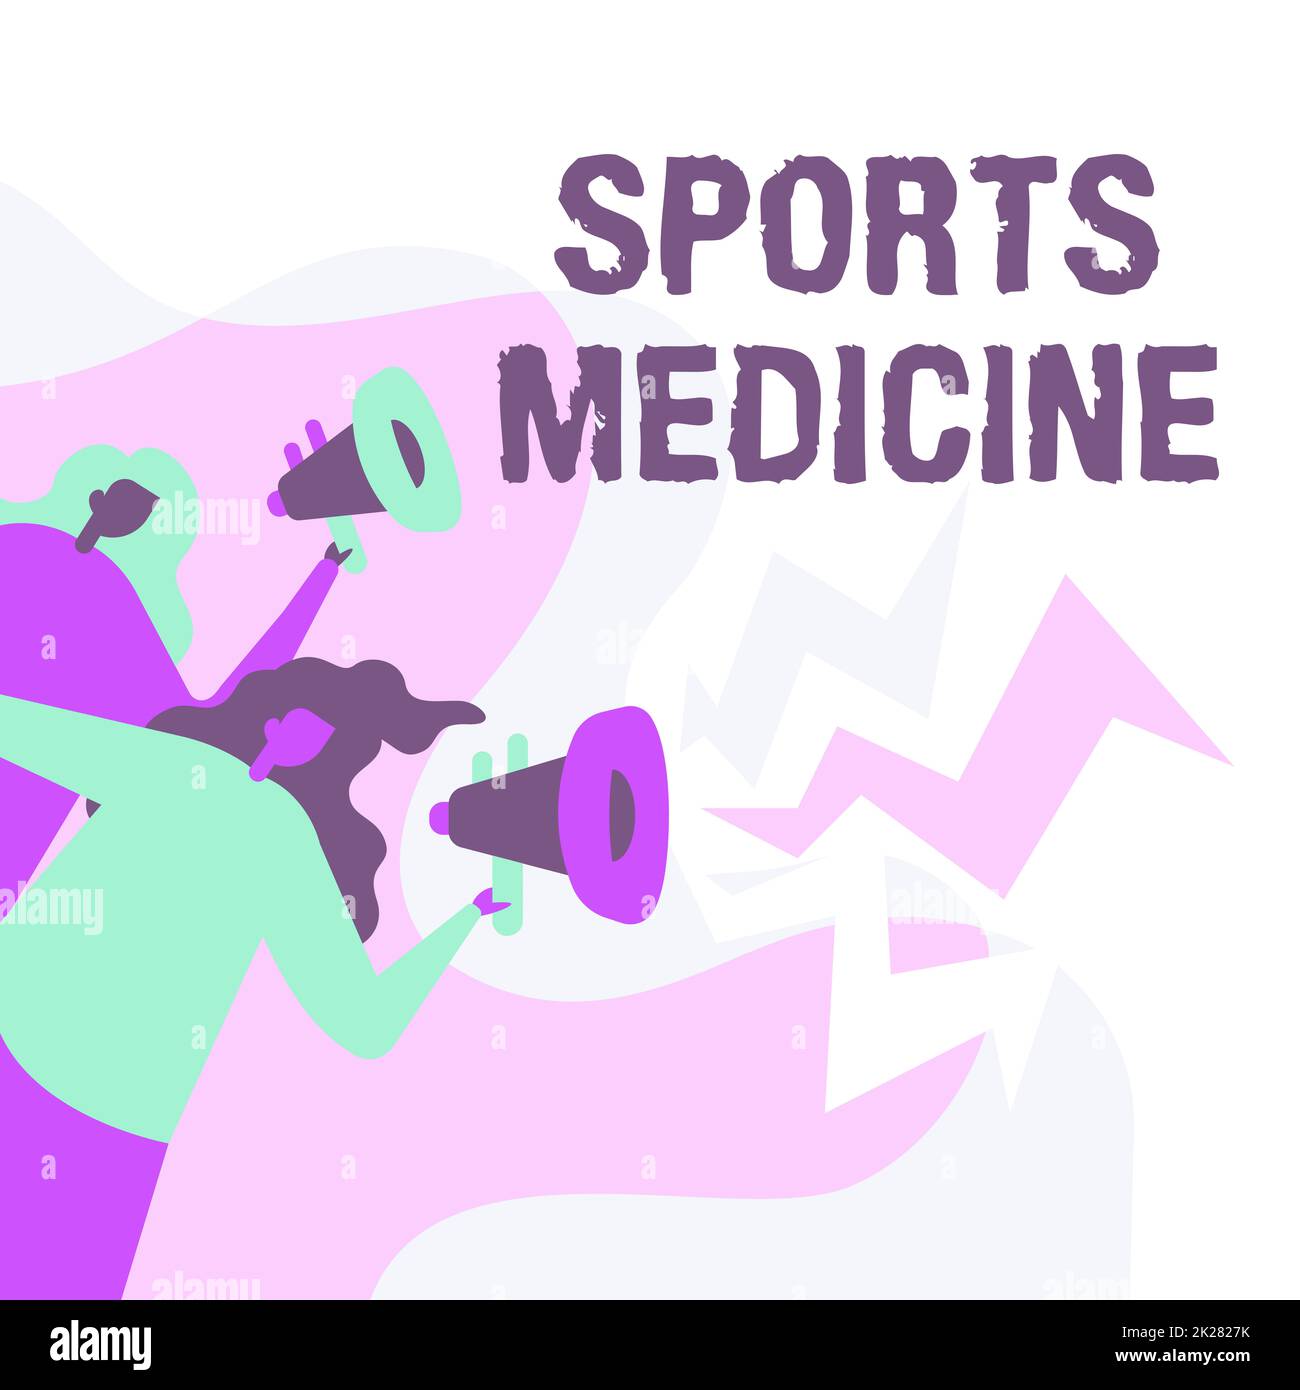 Sign displaying Sports Medicine. Business approach treatment and prevention of injuries related to sports Women Drawing Holding Megaphones Making Announcement To The Public. Stock Photo